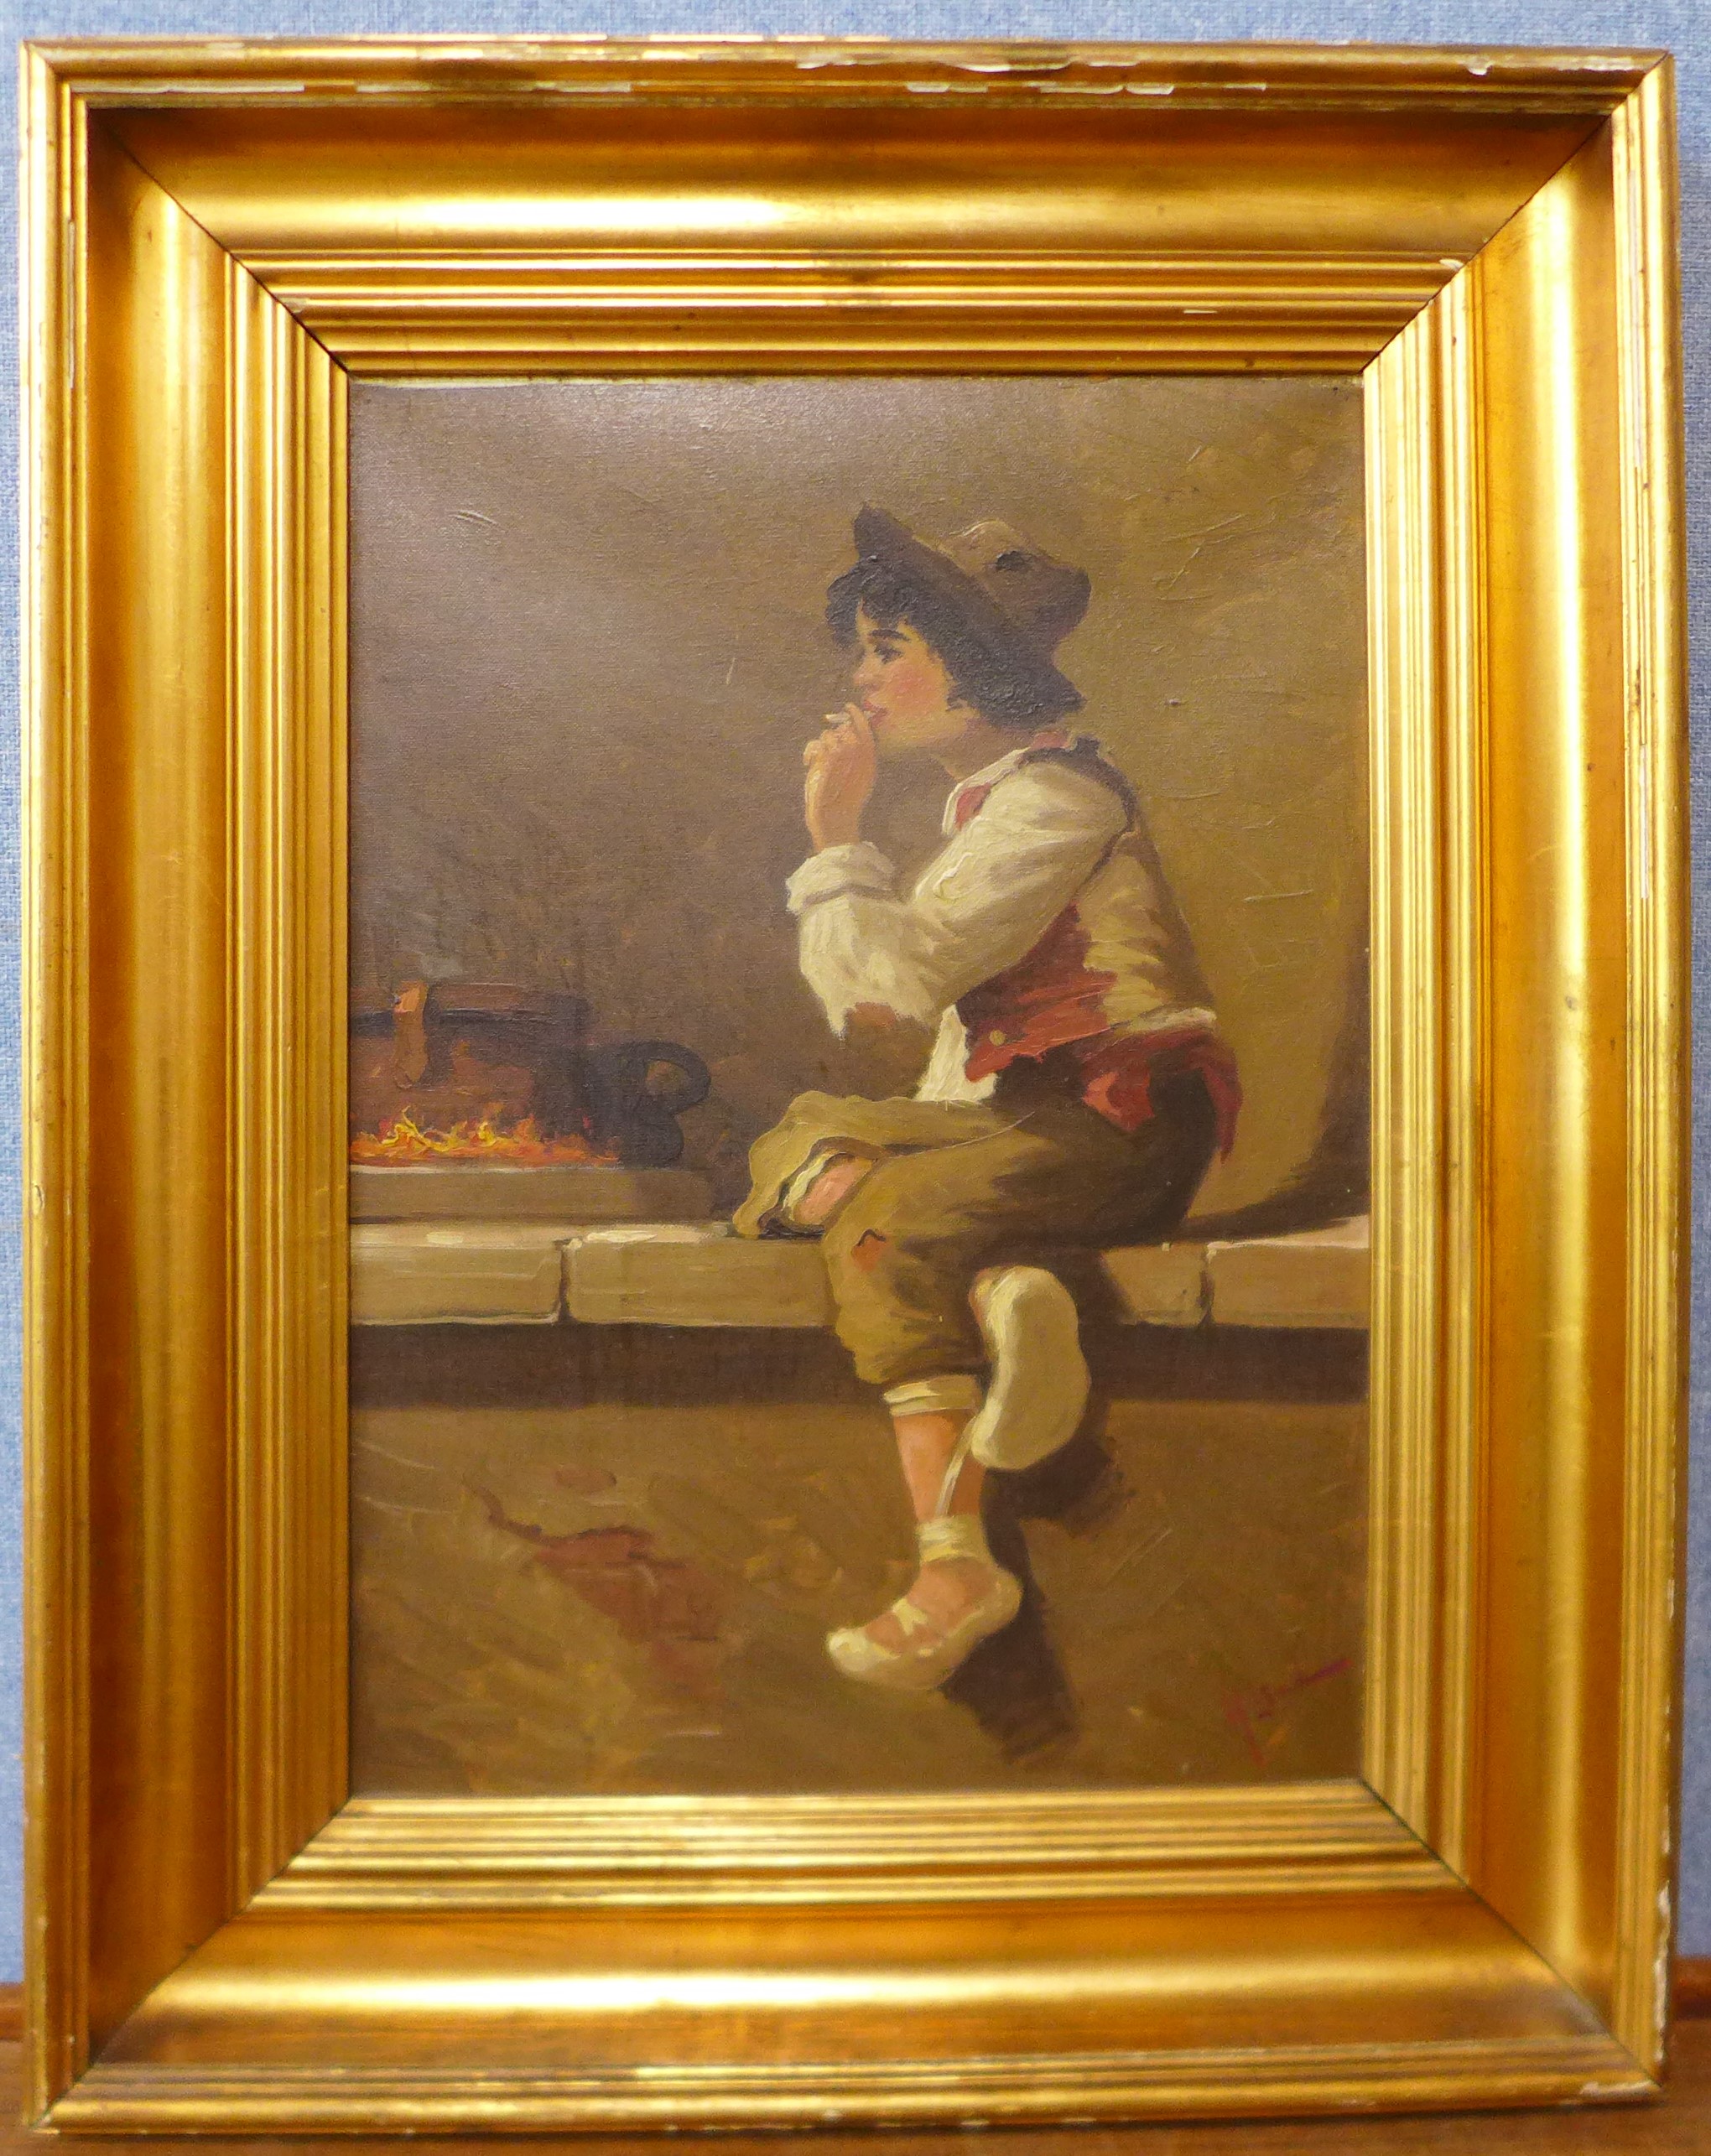 Hans Lund, portrait of a boy smoking, oil on canvas, 46 x 33cms, framed - Image 2 of 5